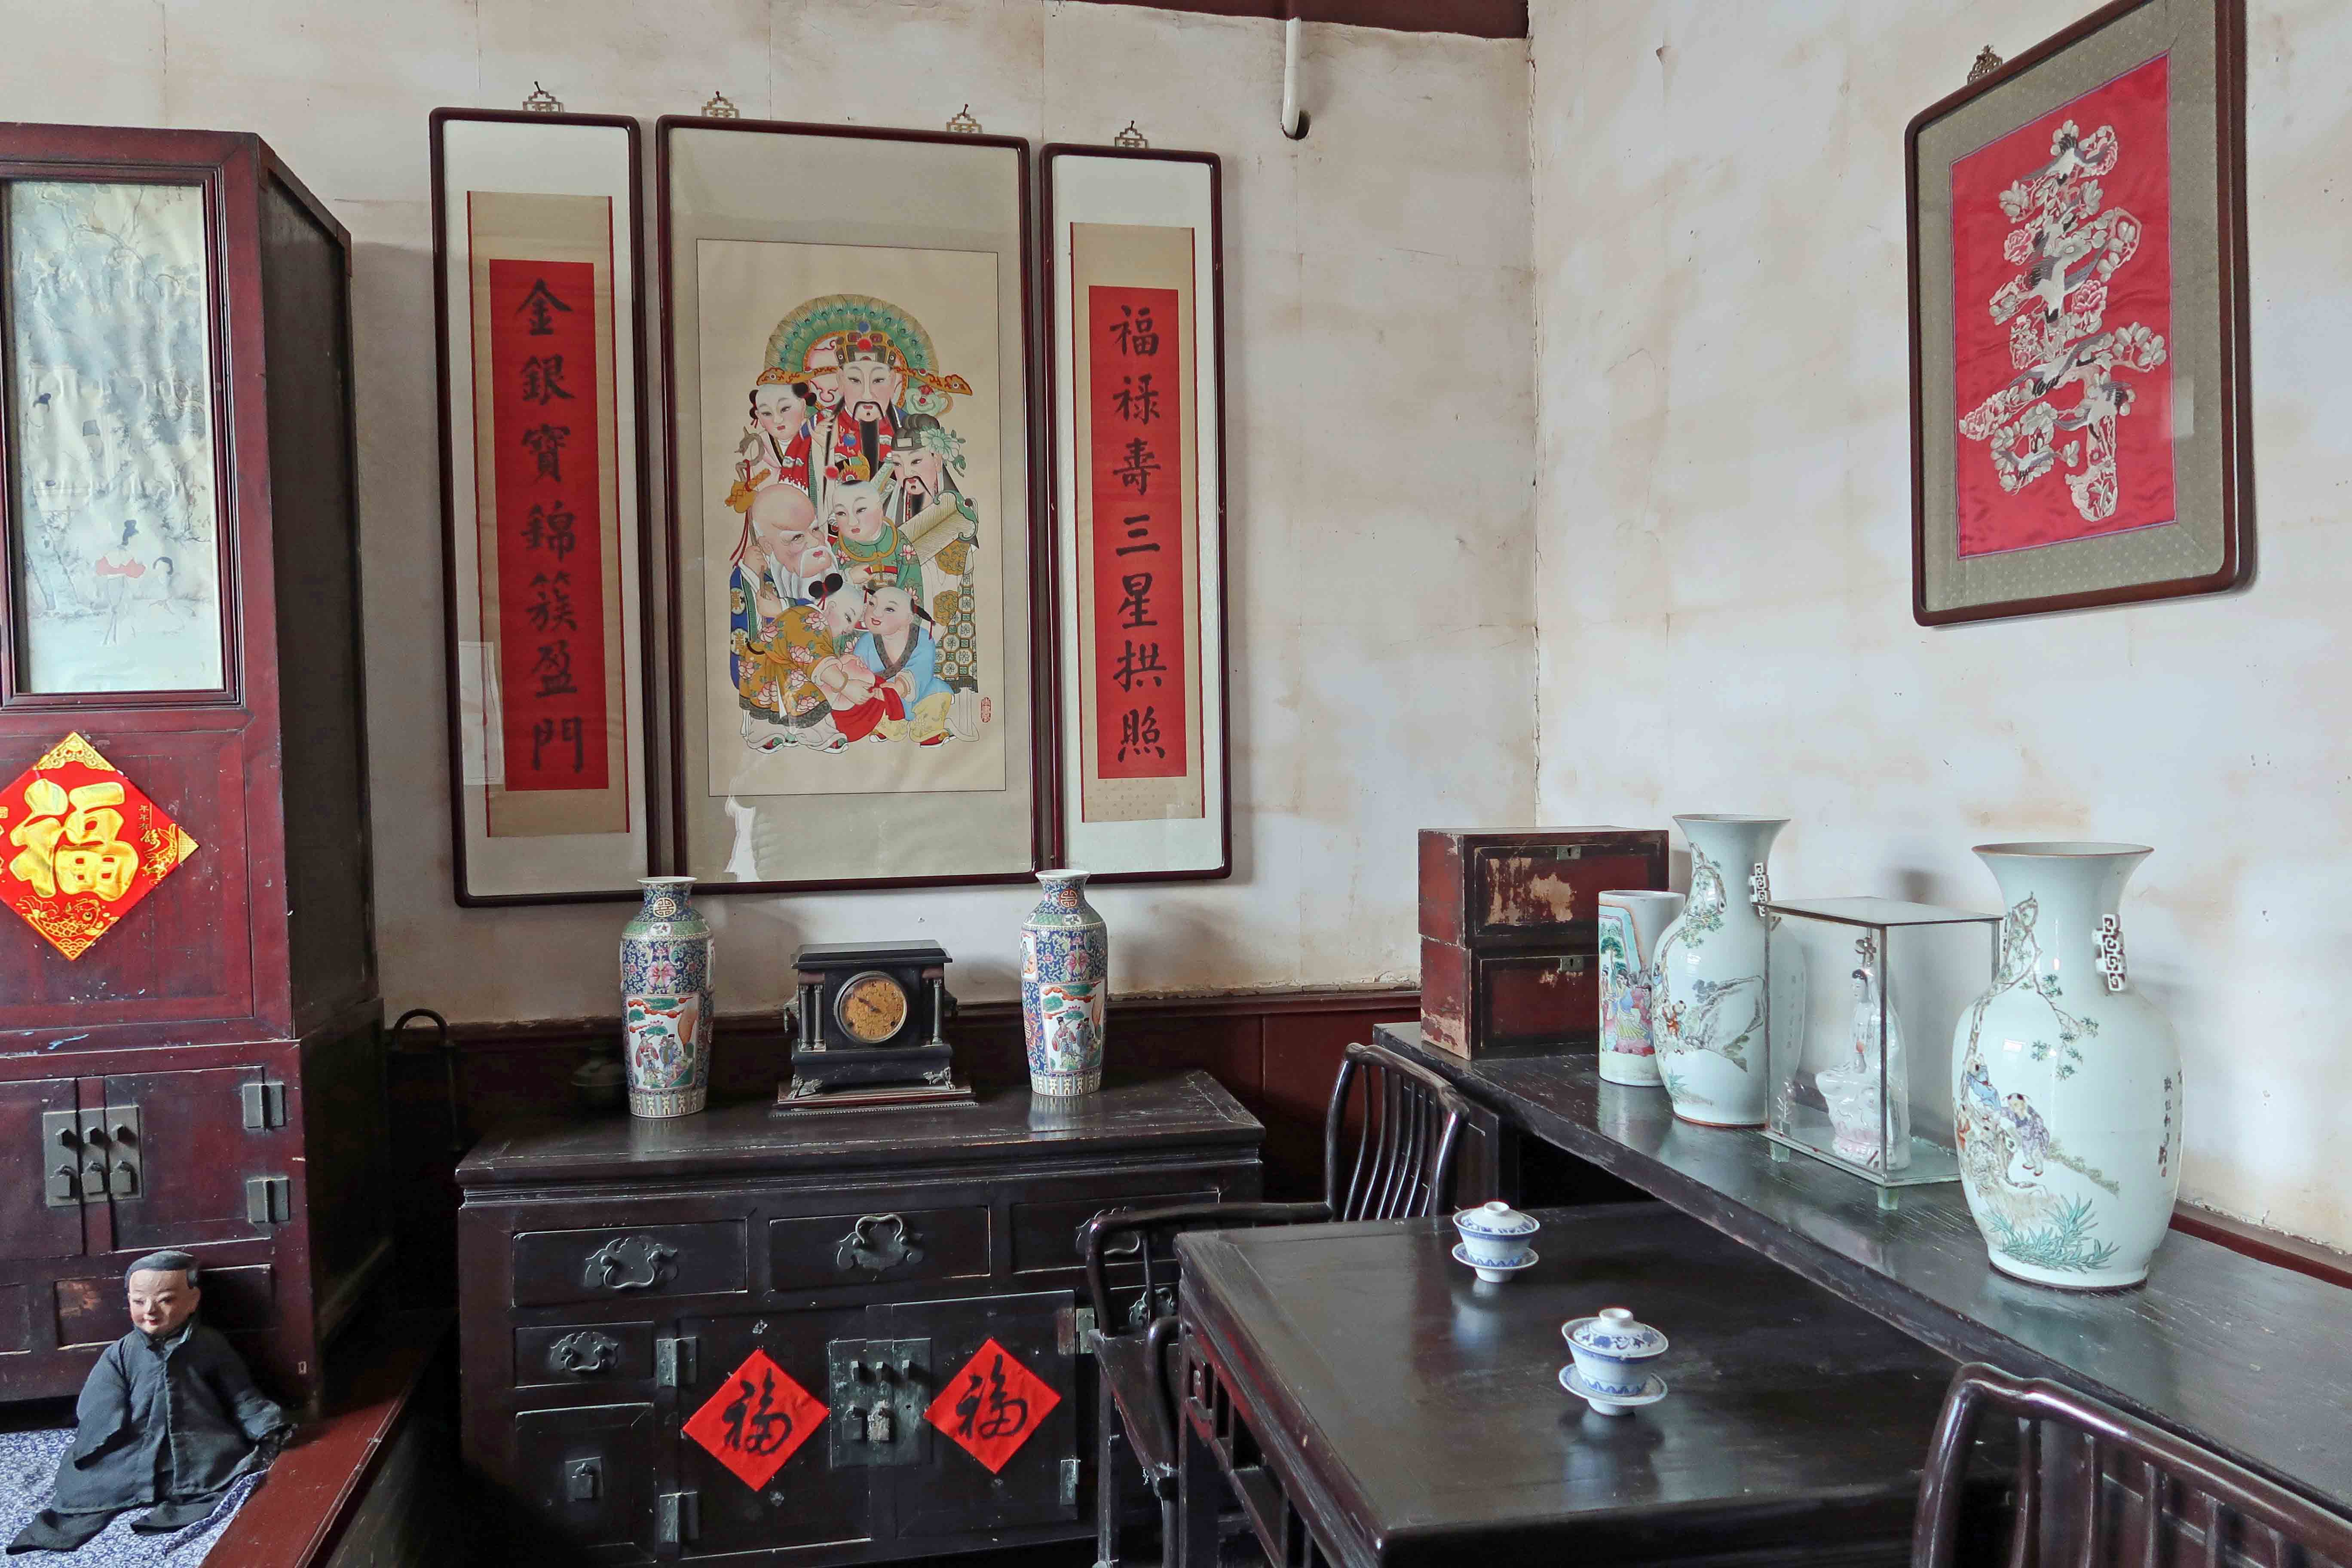 Shi Family Mansion artifacts from the late 1800s